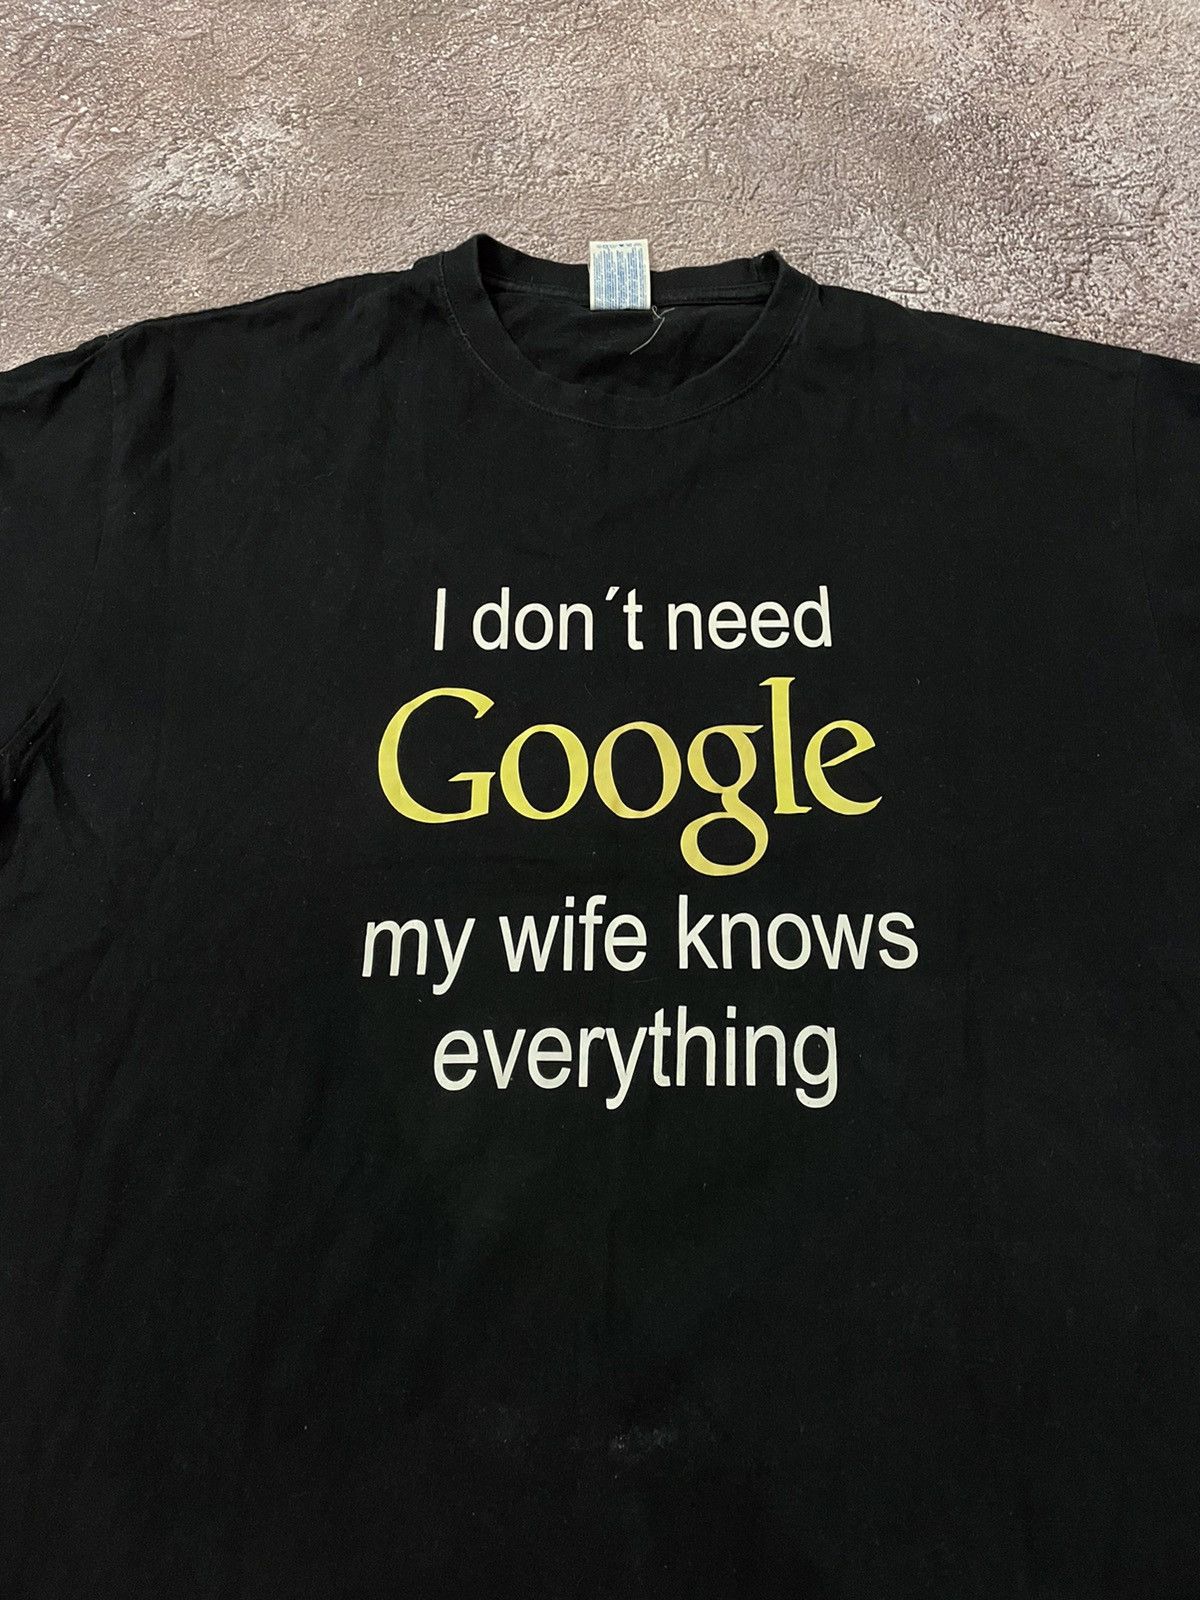 Vintage VINTAGE 90S HUMOR TEE “ I DONT NEED GOOGLE WIFE “ BUYMYSTUFF Size US XL / EU 56 / 4 - 5 Preview